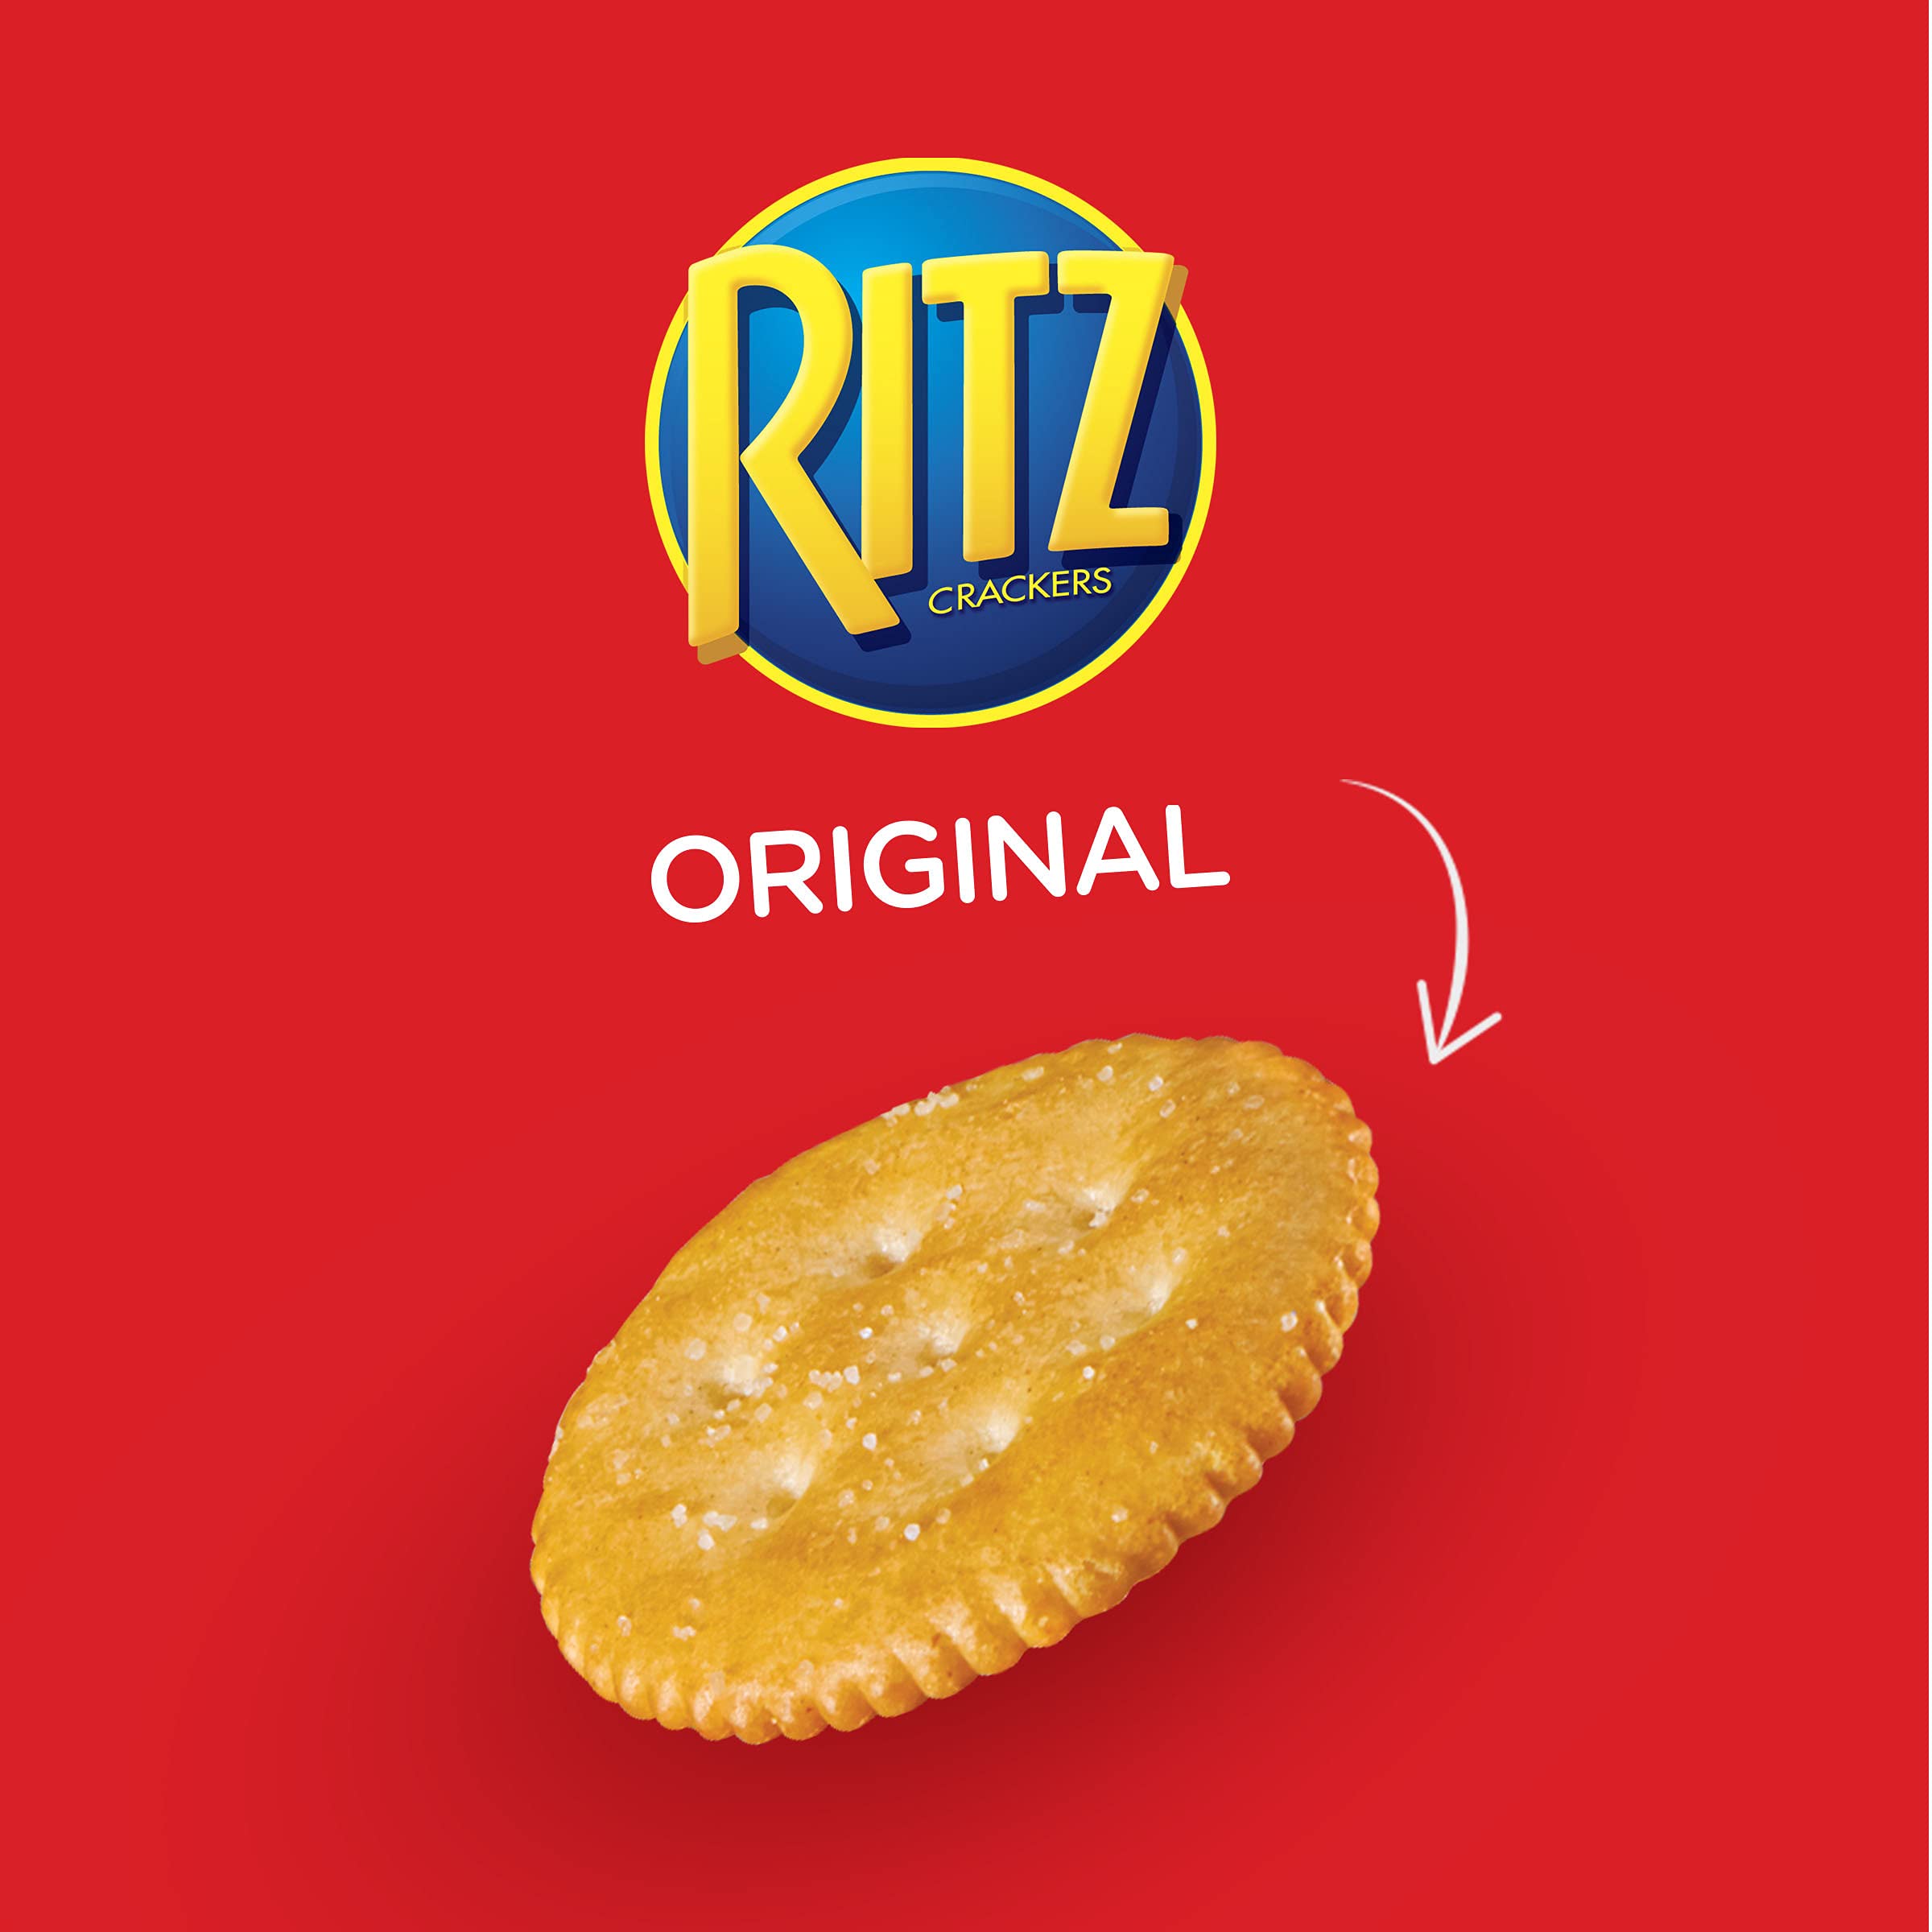 Ritz Original Party Size Crackers, 1 package 1lb and 11.4oz (776g or 27.4oz) )